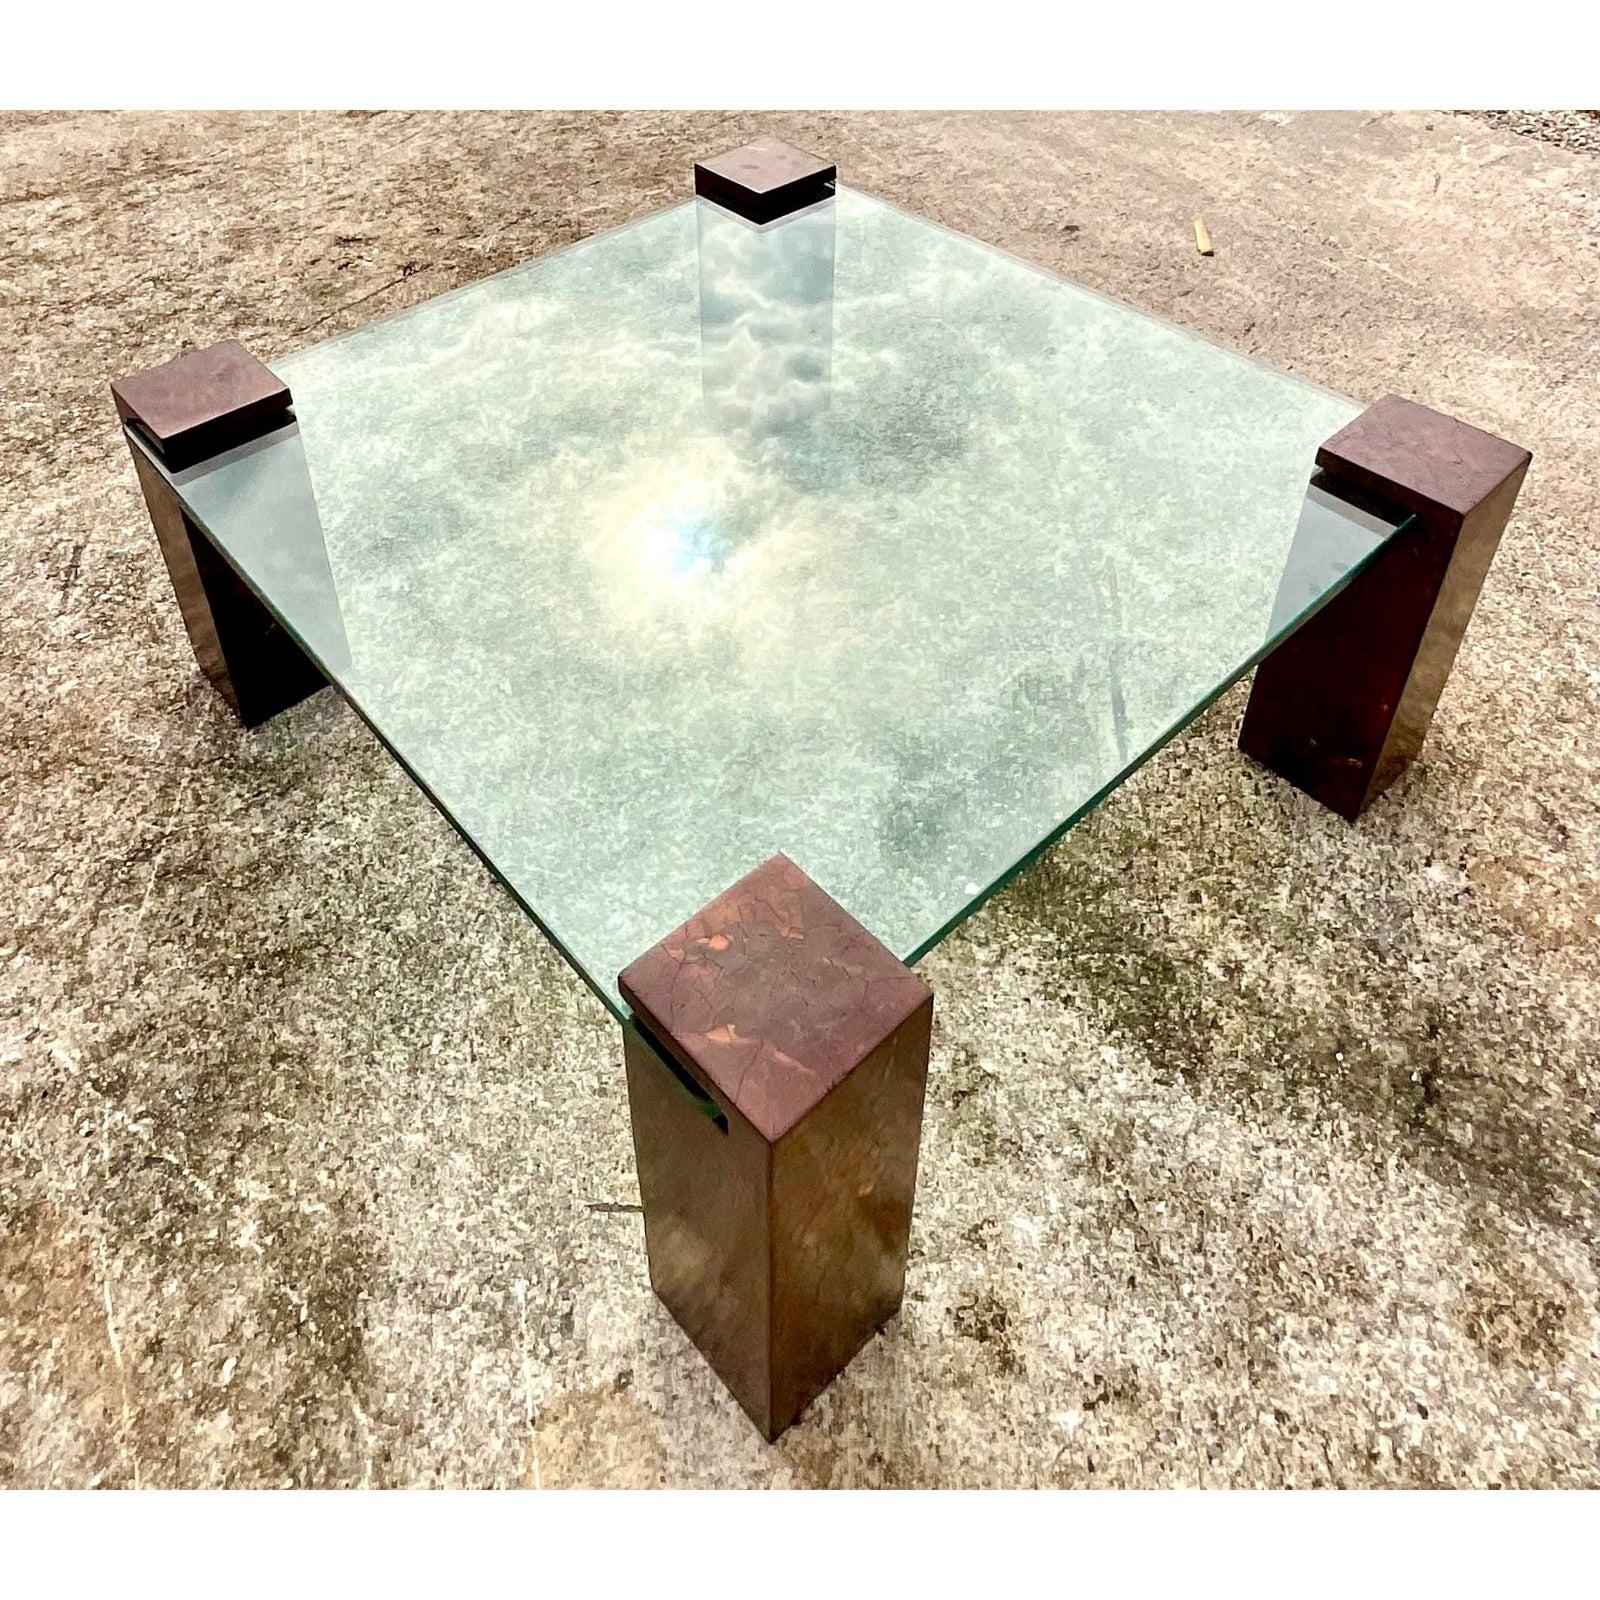 Vintage Boho coconut shell coffee table. A super sleek and minimal design with four Coconut shell pedestals. The thick glass slides neatly into the pedestals. Acquired from a Palm Beach estate.